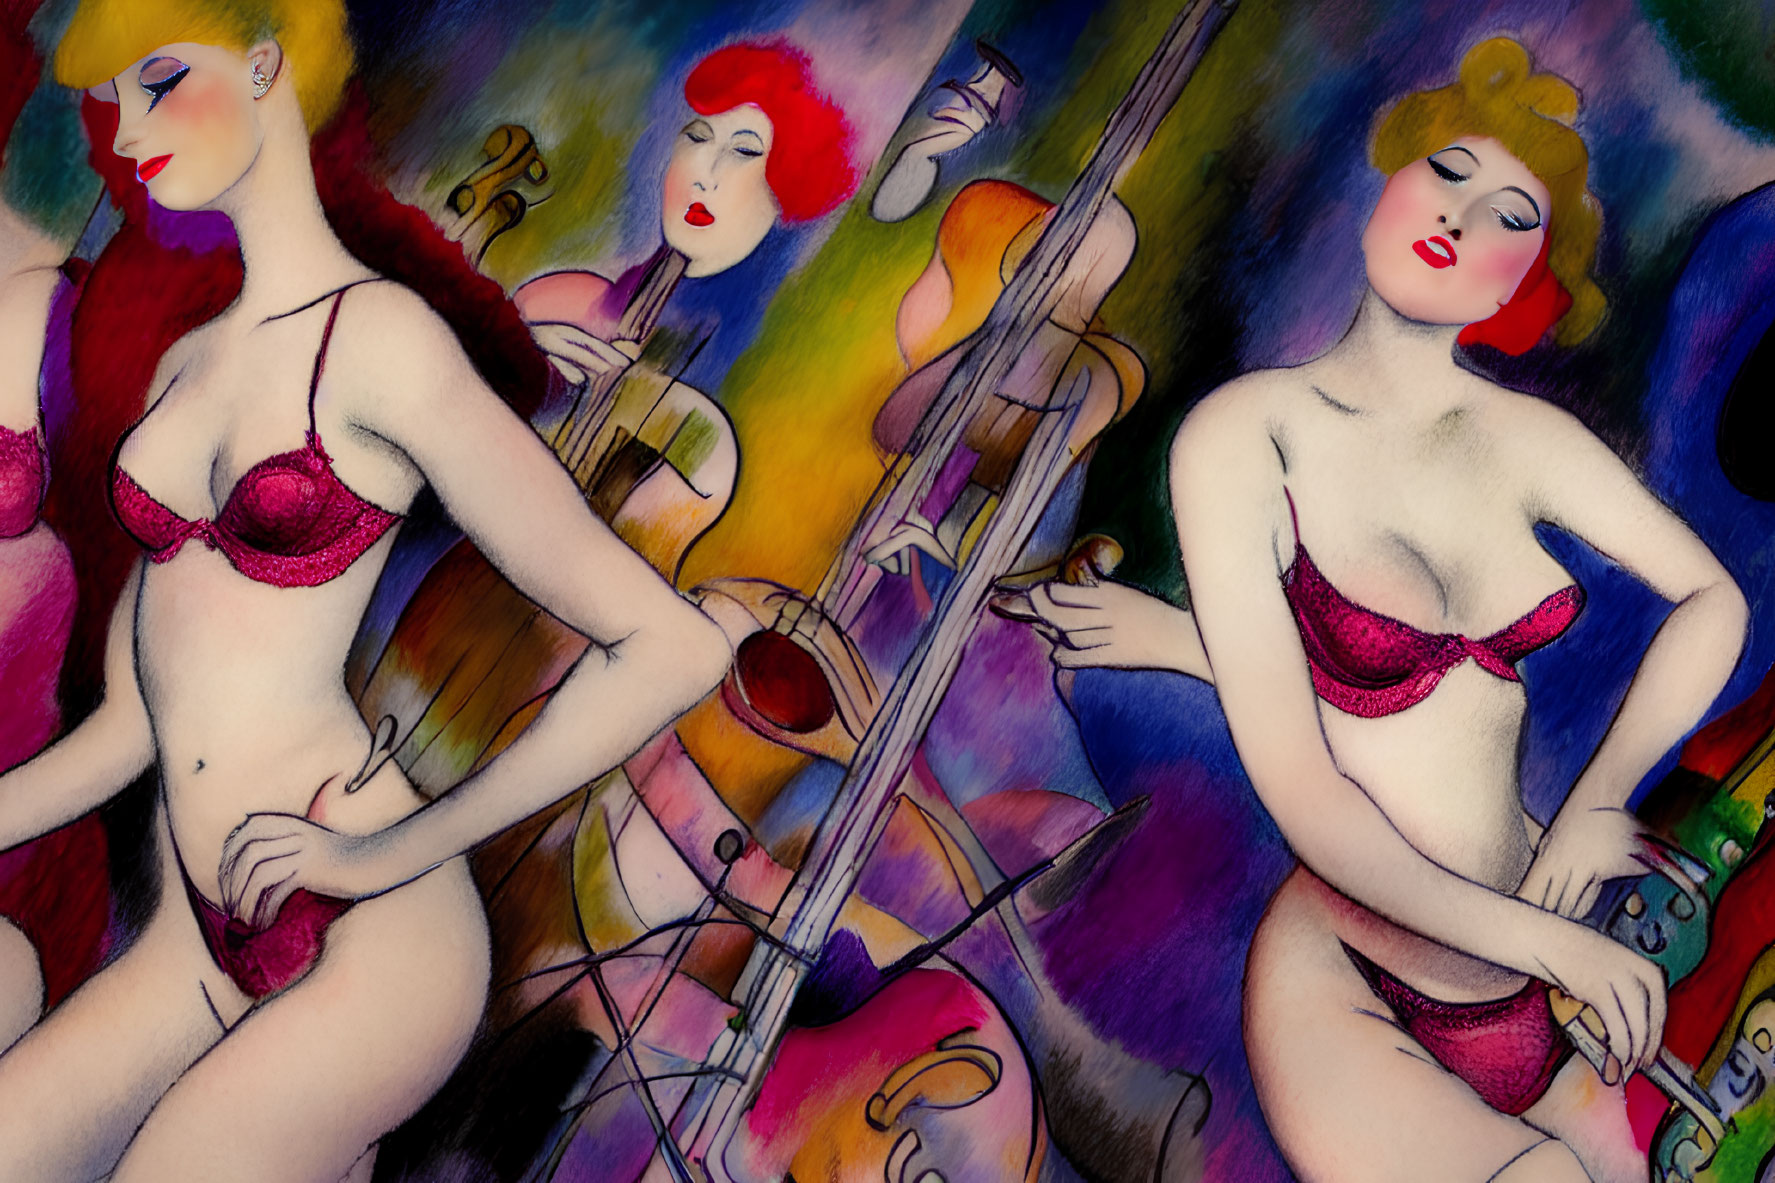 Vibrant illustration of three women in red lingerie playing string instruments